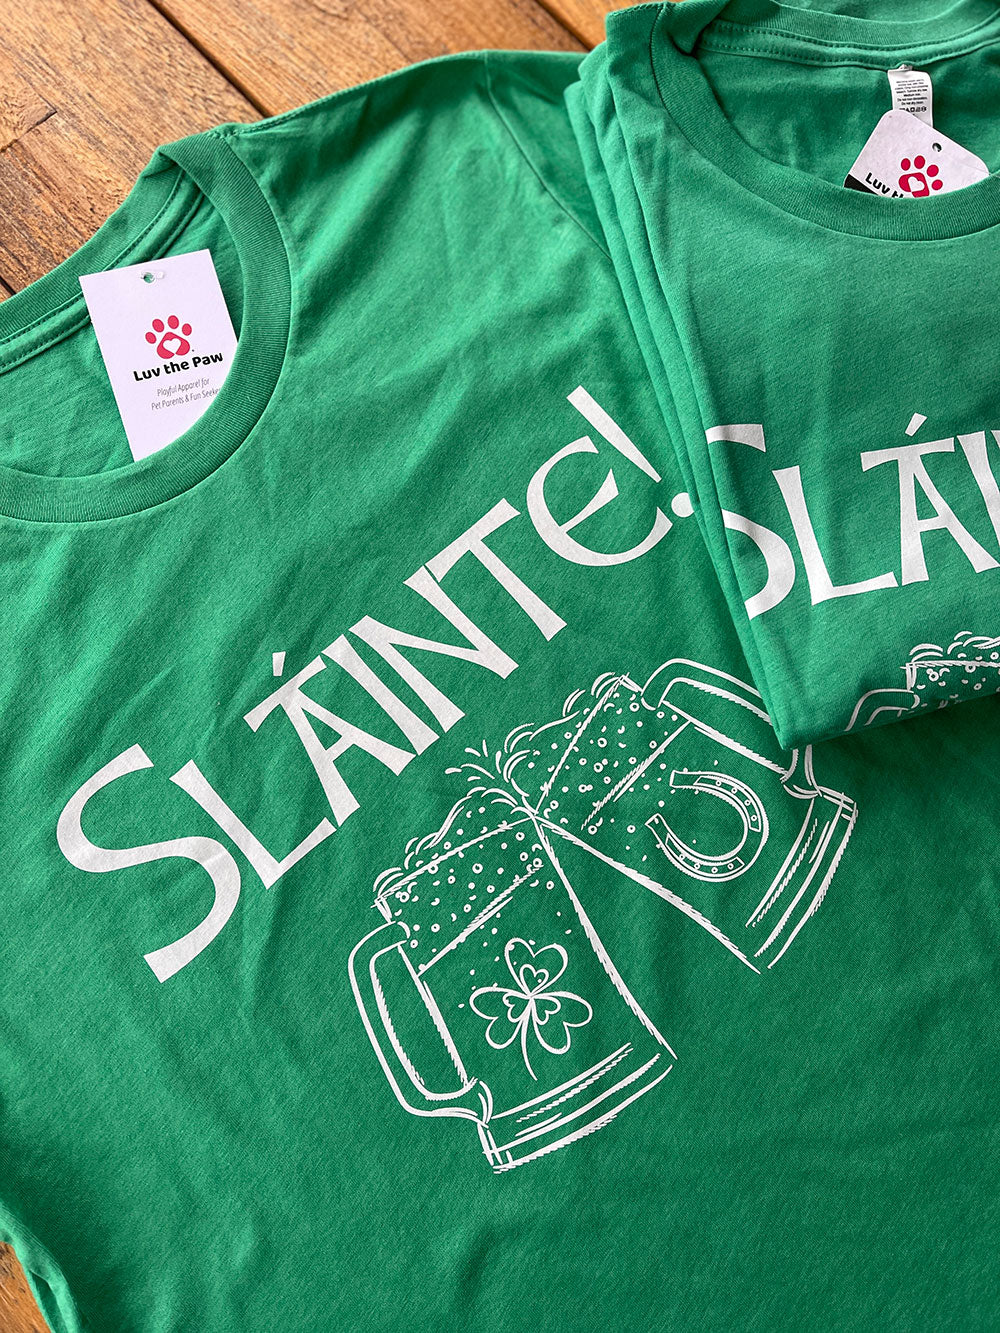 Slainte with Beers | Best St. Patrick's Day T-shirt